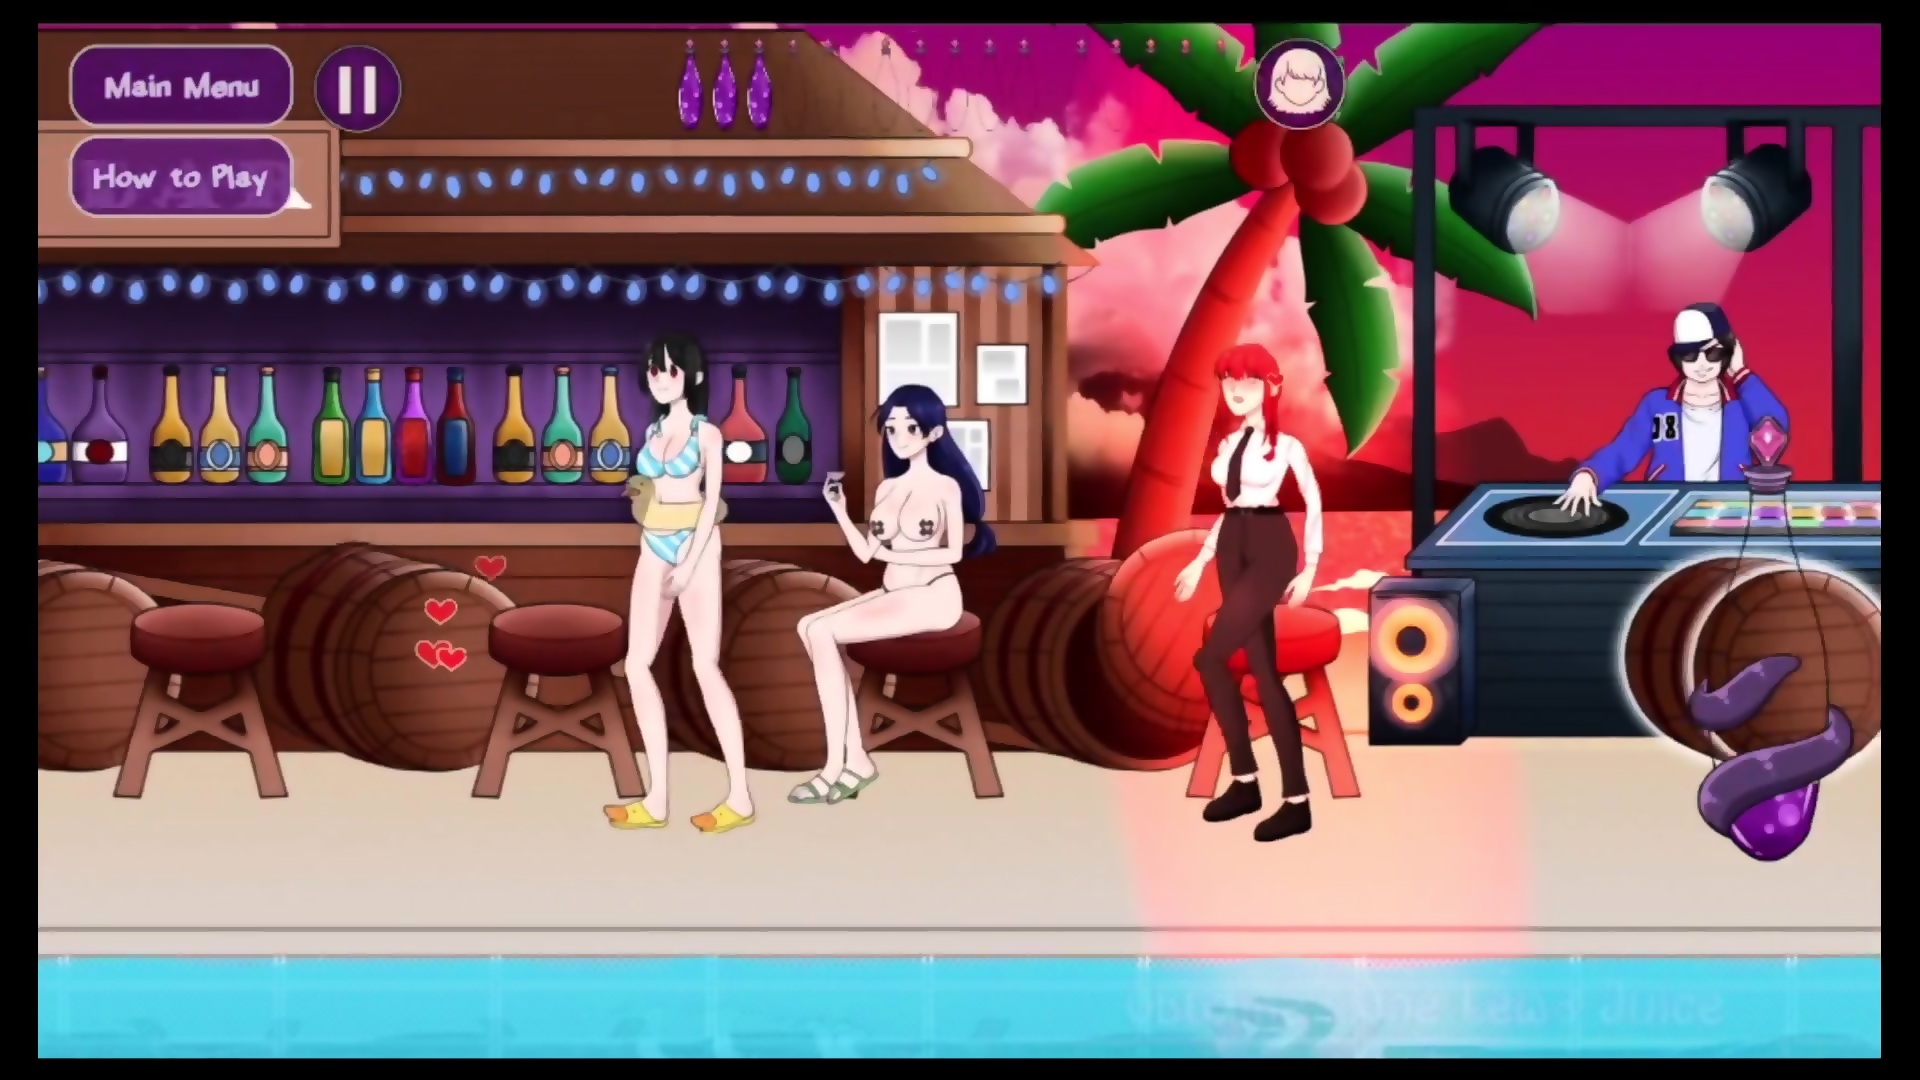 Tentacle Beach Party NEW GAMEPLAY + ANIME CHARACTER image pic